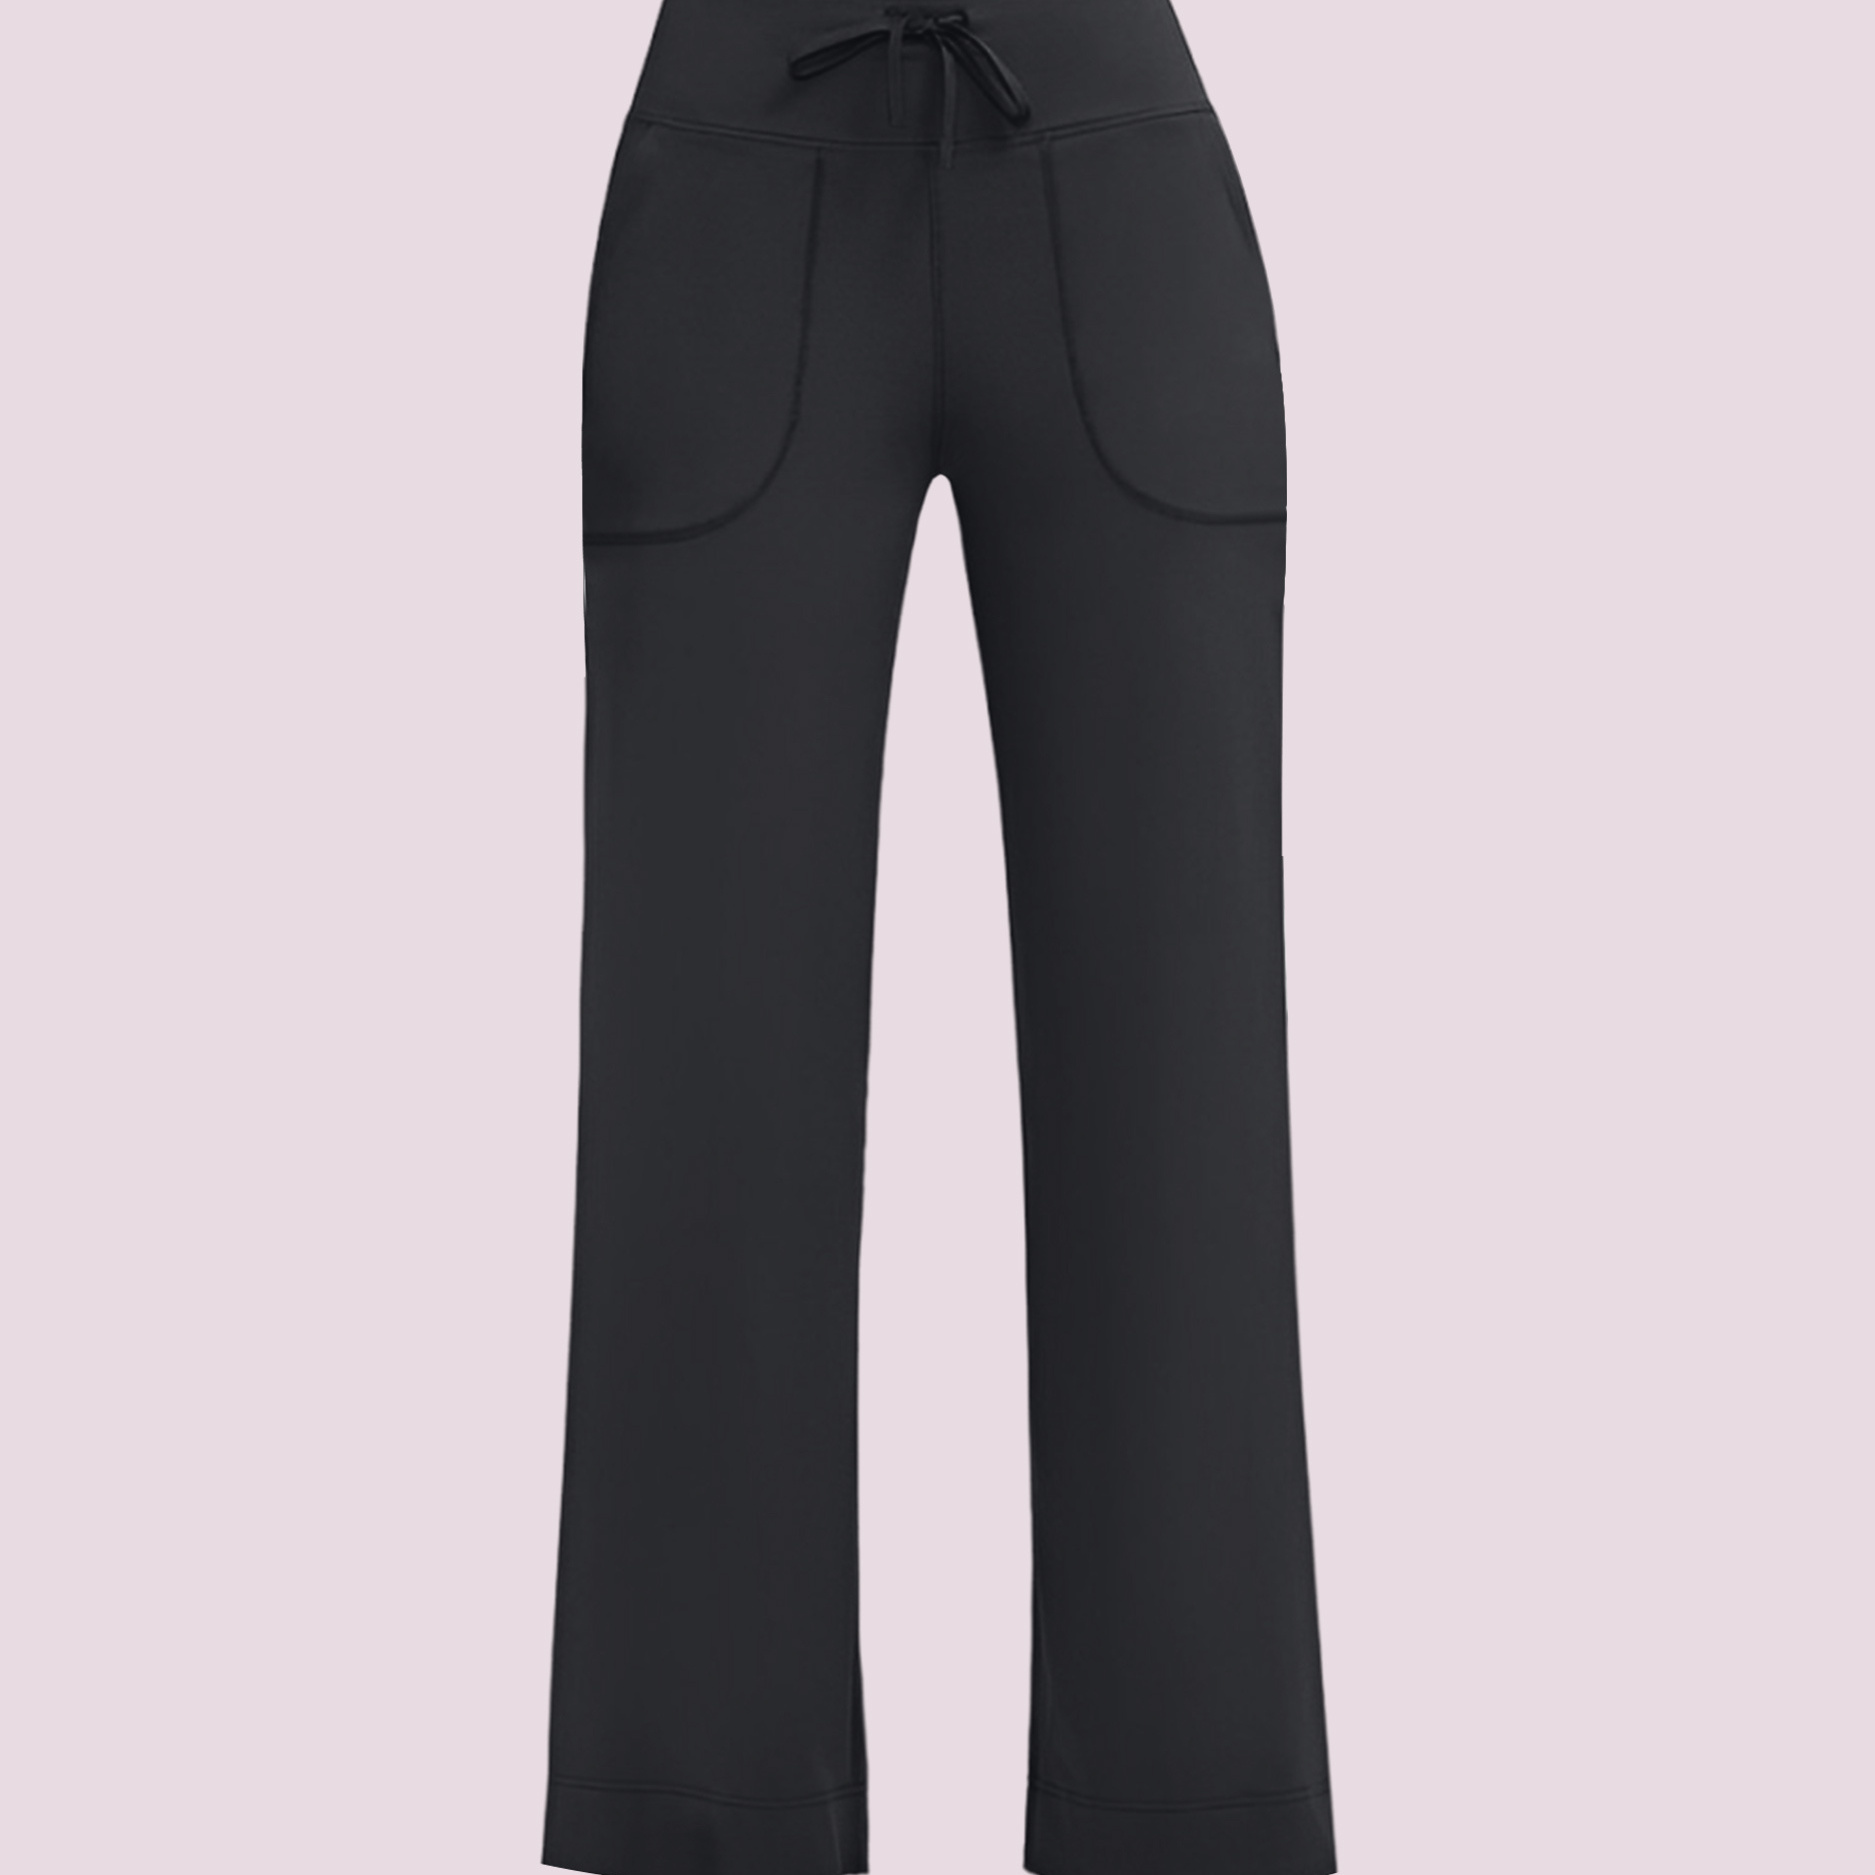 

Comfortable And Stylish Women's Drawstring Pants With Wide Legs And Elastic Waist